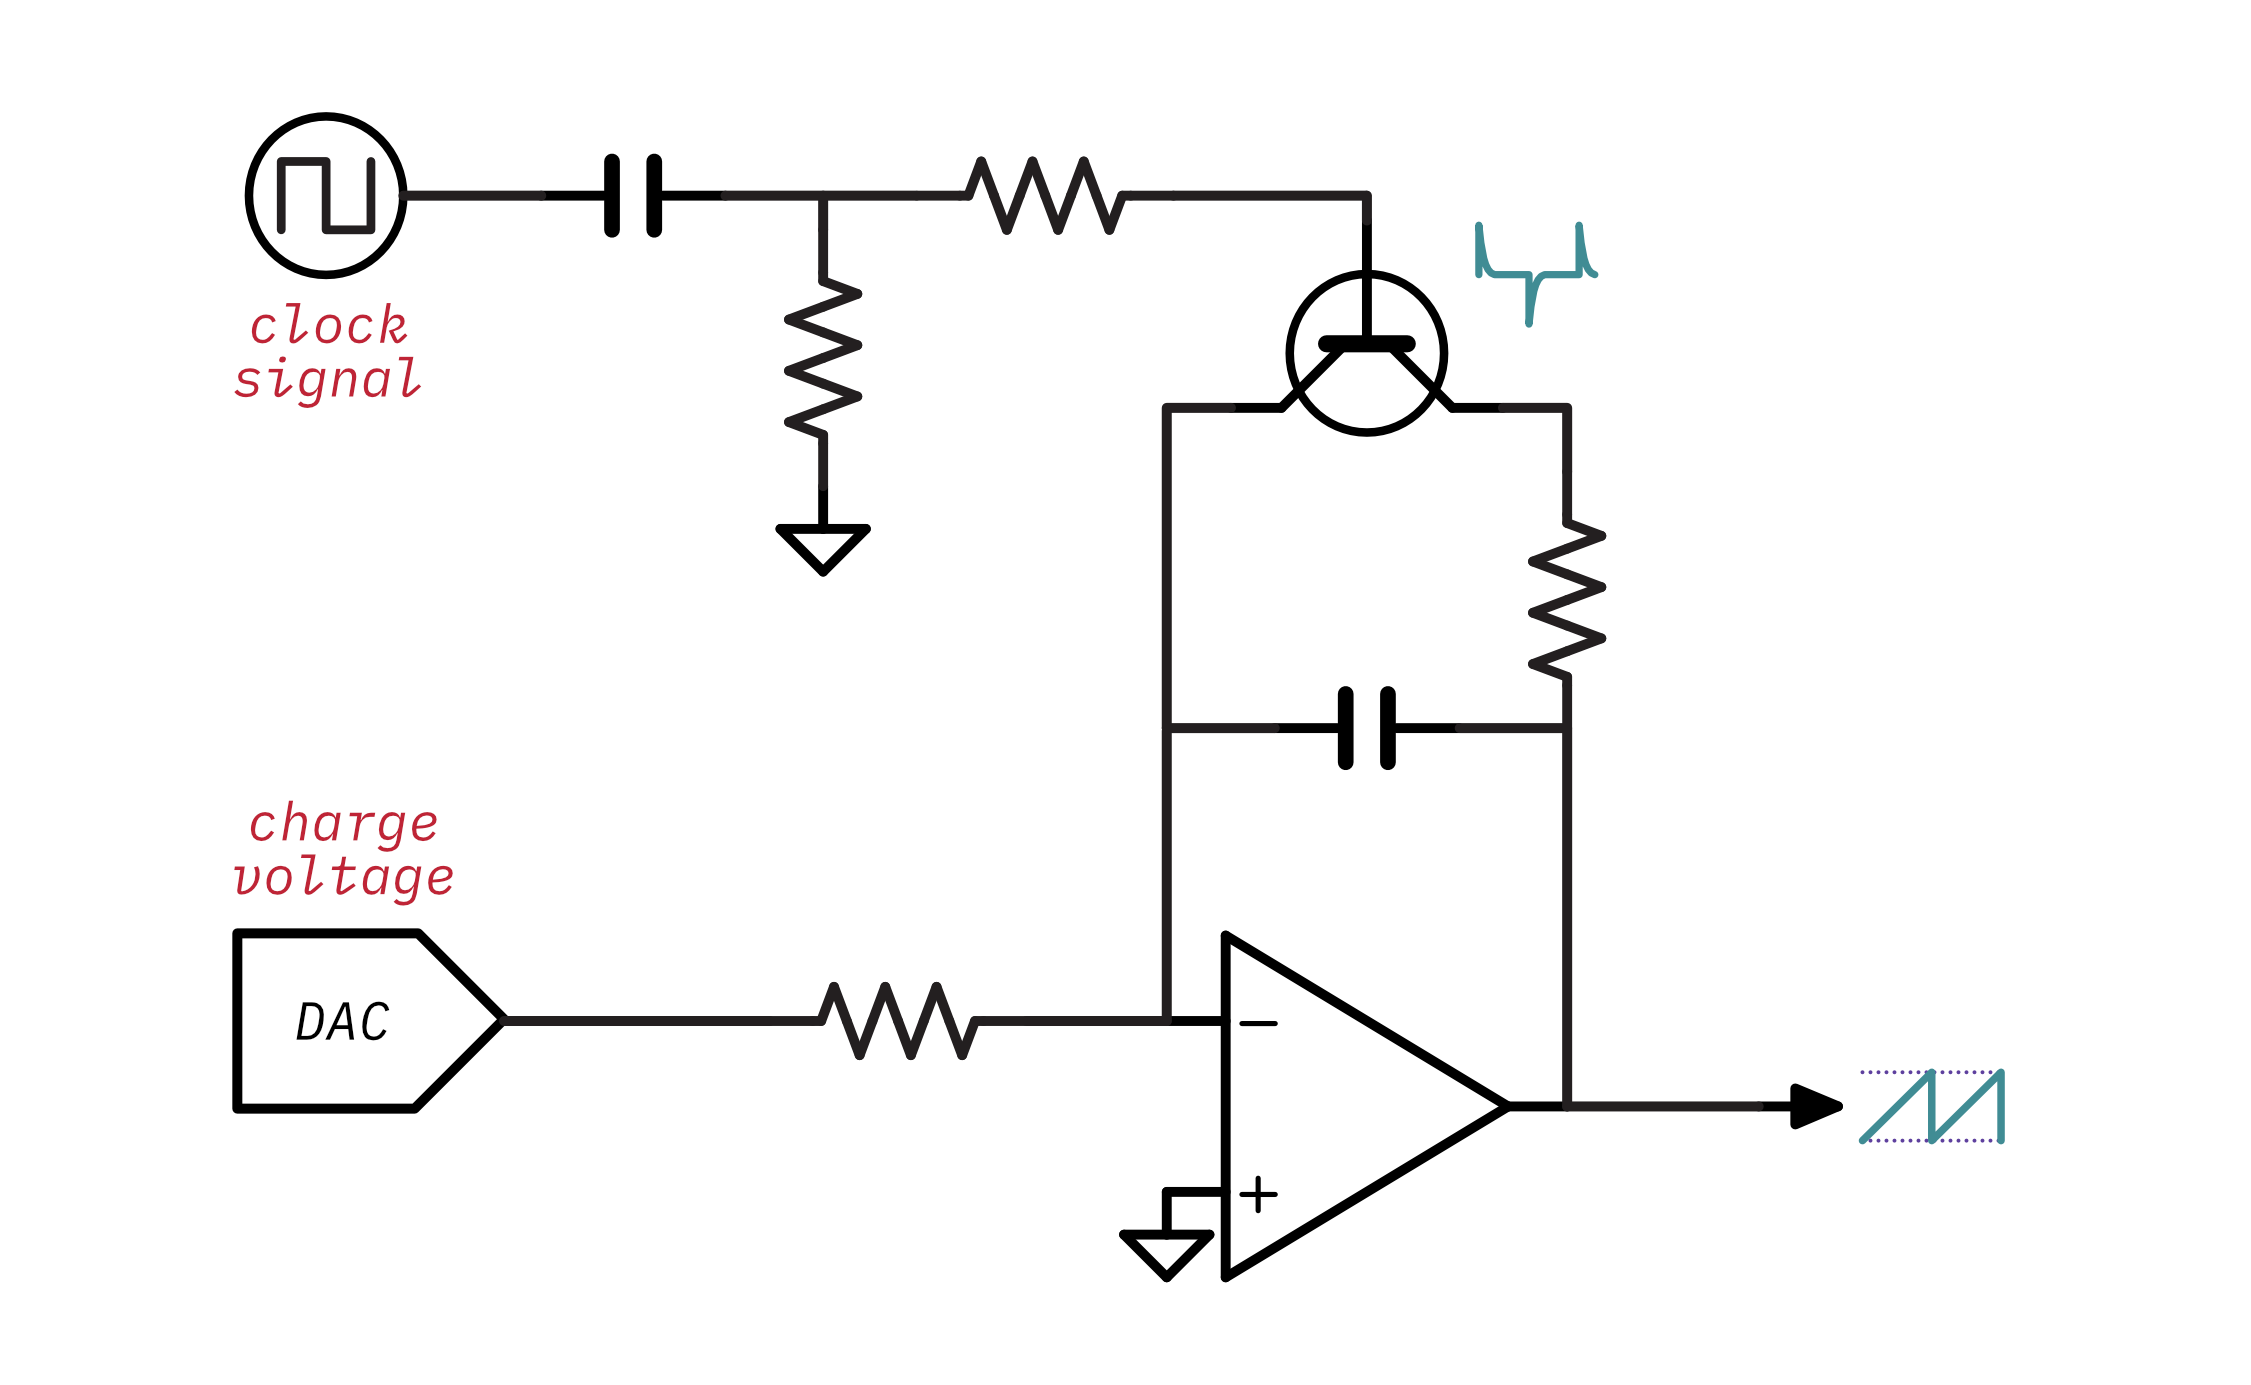 Schematic of a DCO with a DAC added